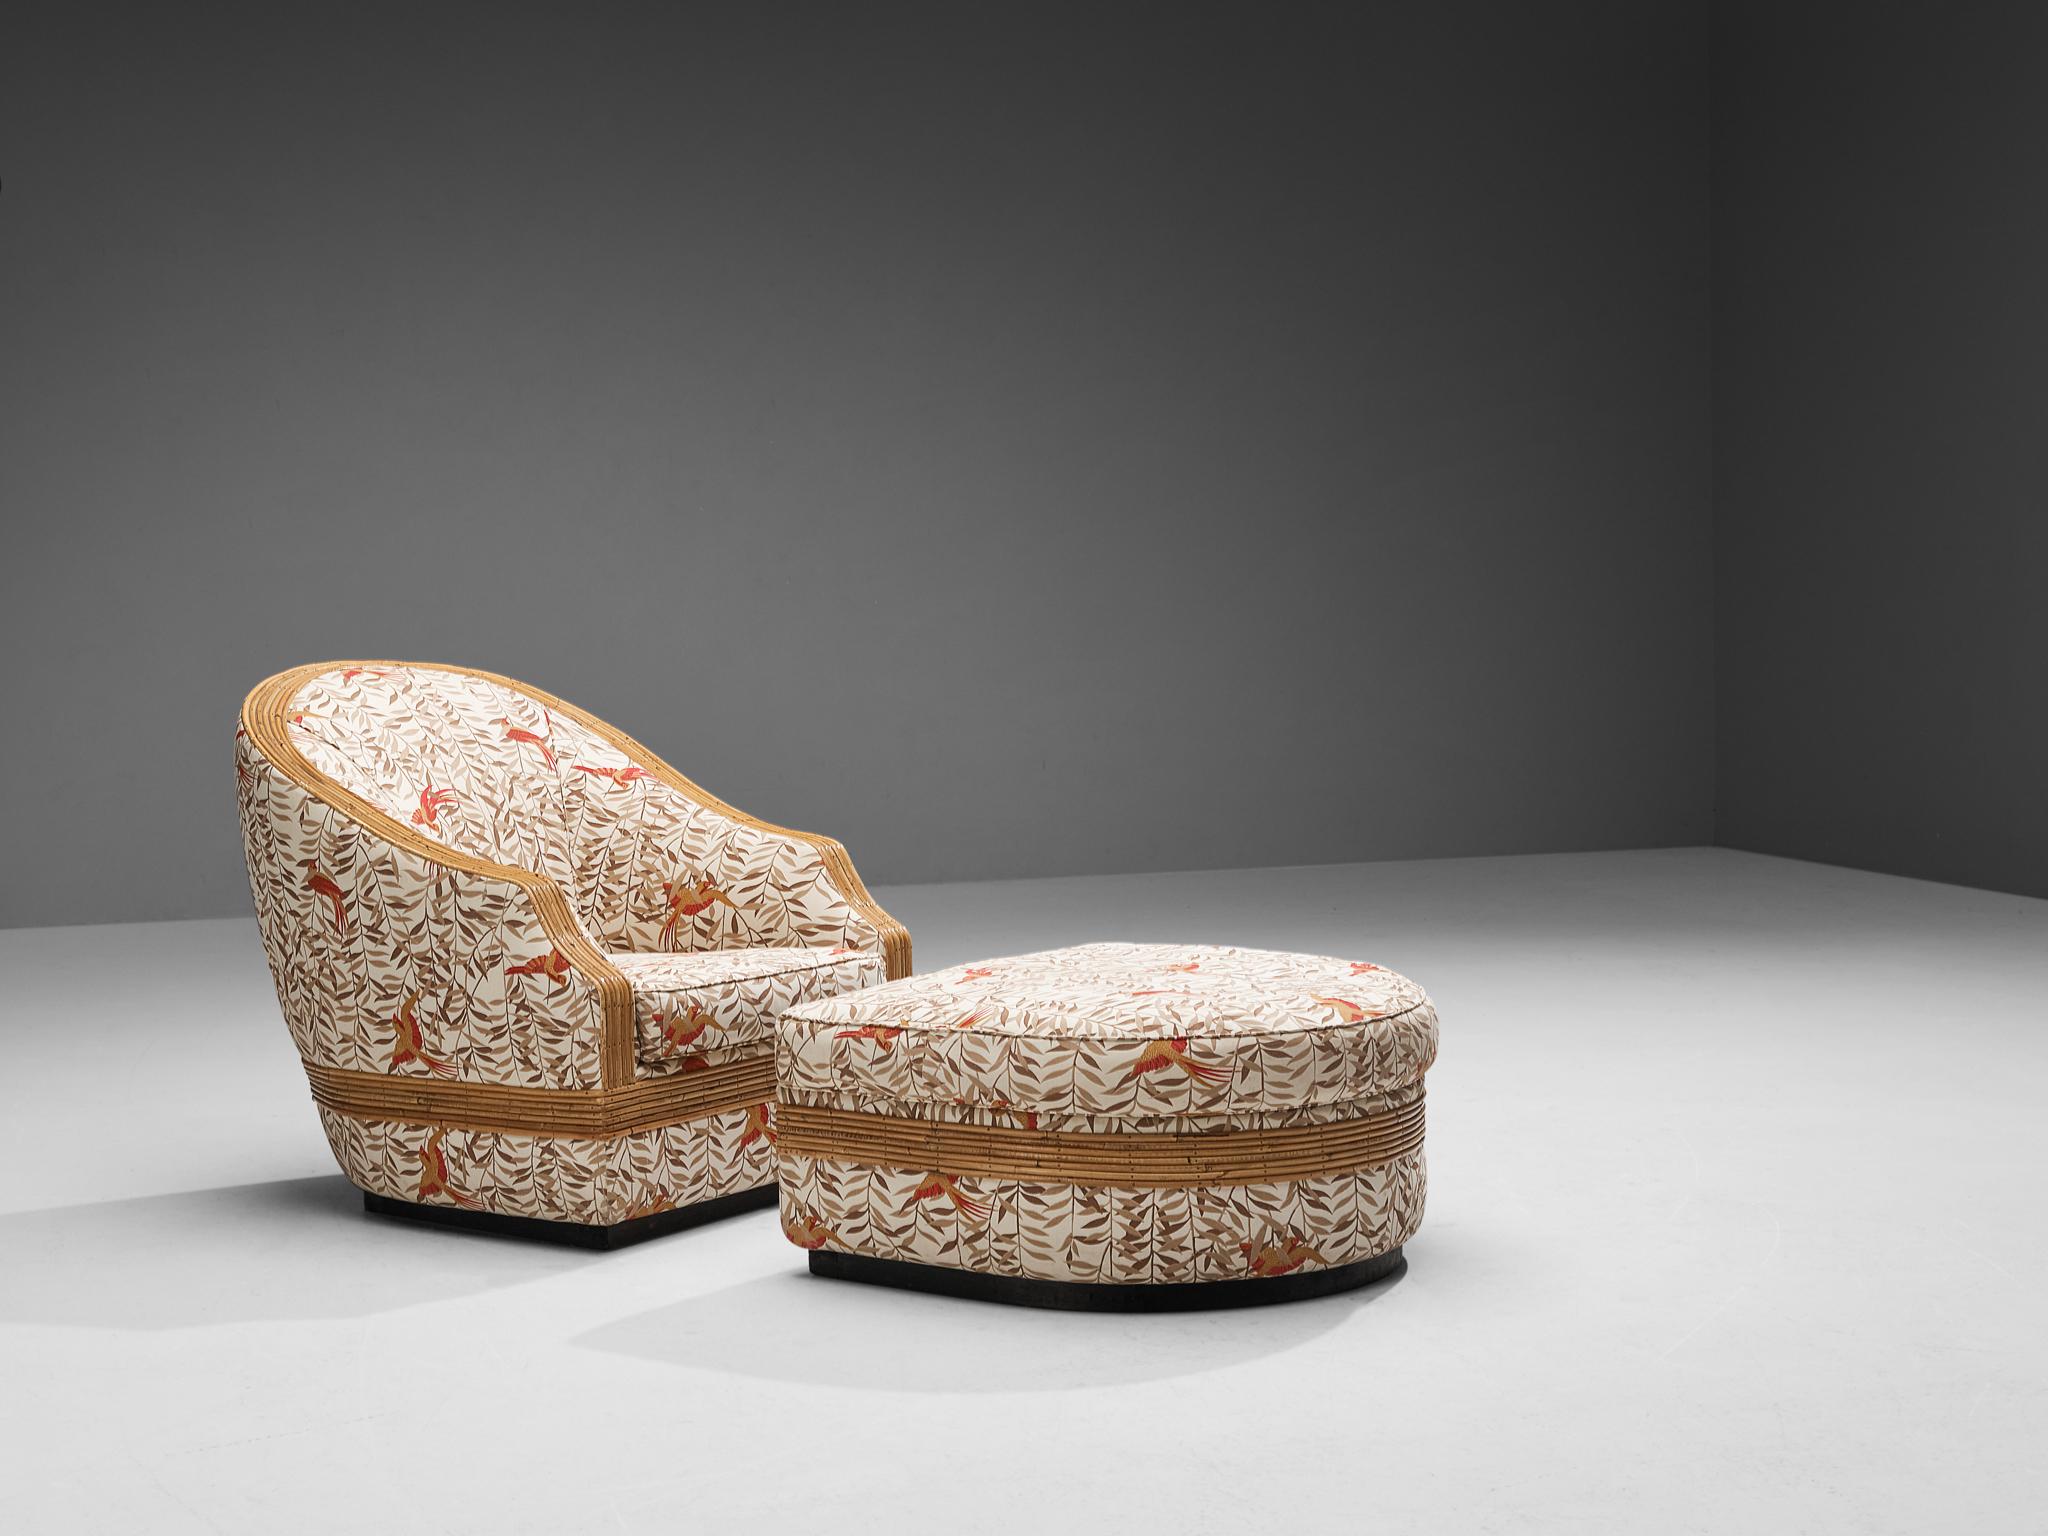 Vivai Del Sud, lounge chair and ottoman, bamboo, fabric, Italy, 1970s

Greatly looking and imposing lounge chair with ottoman. This particular design breathes the 1970s aesthetics. Executed in bamboo and a tropical patterned fabric, these pieces